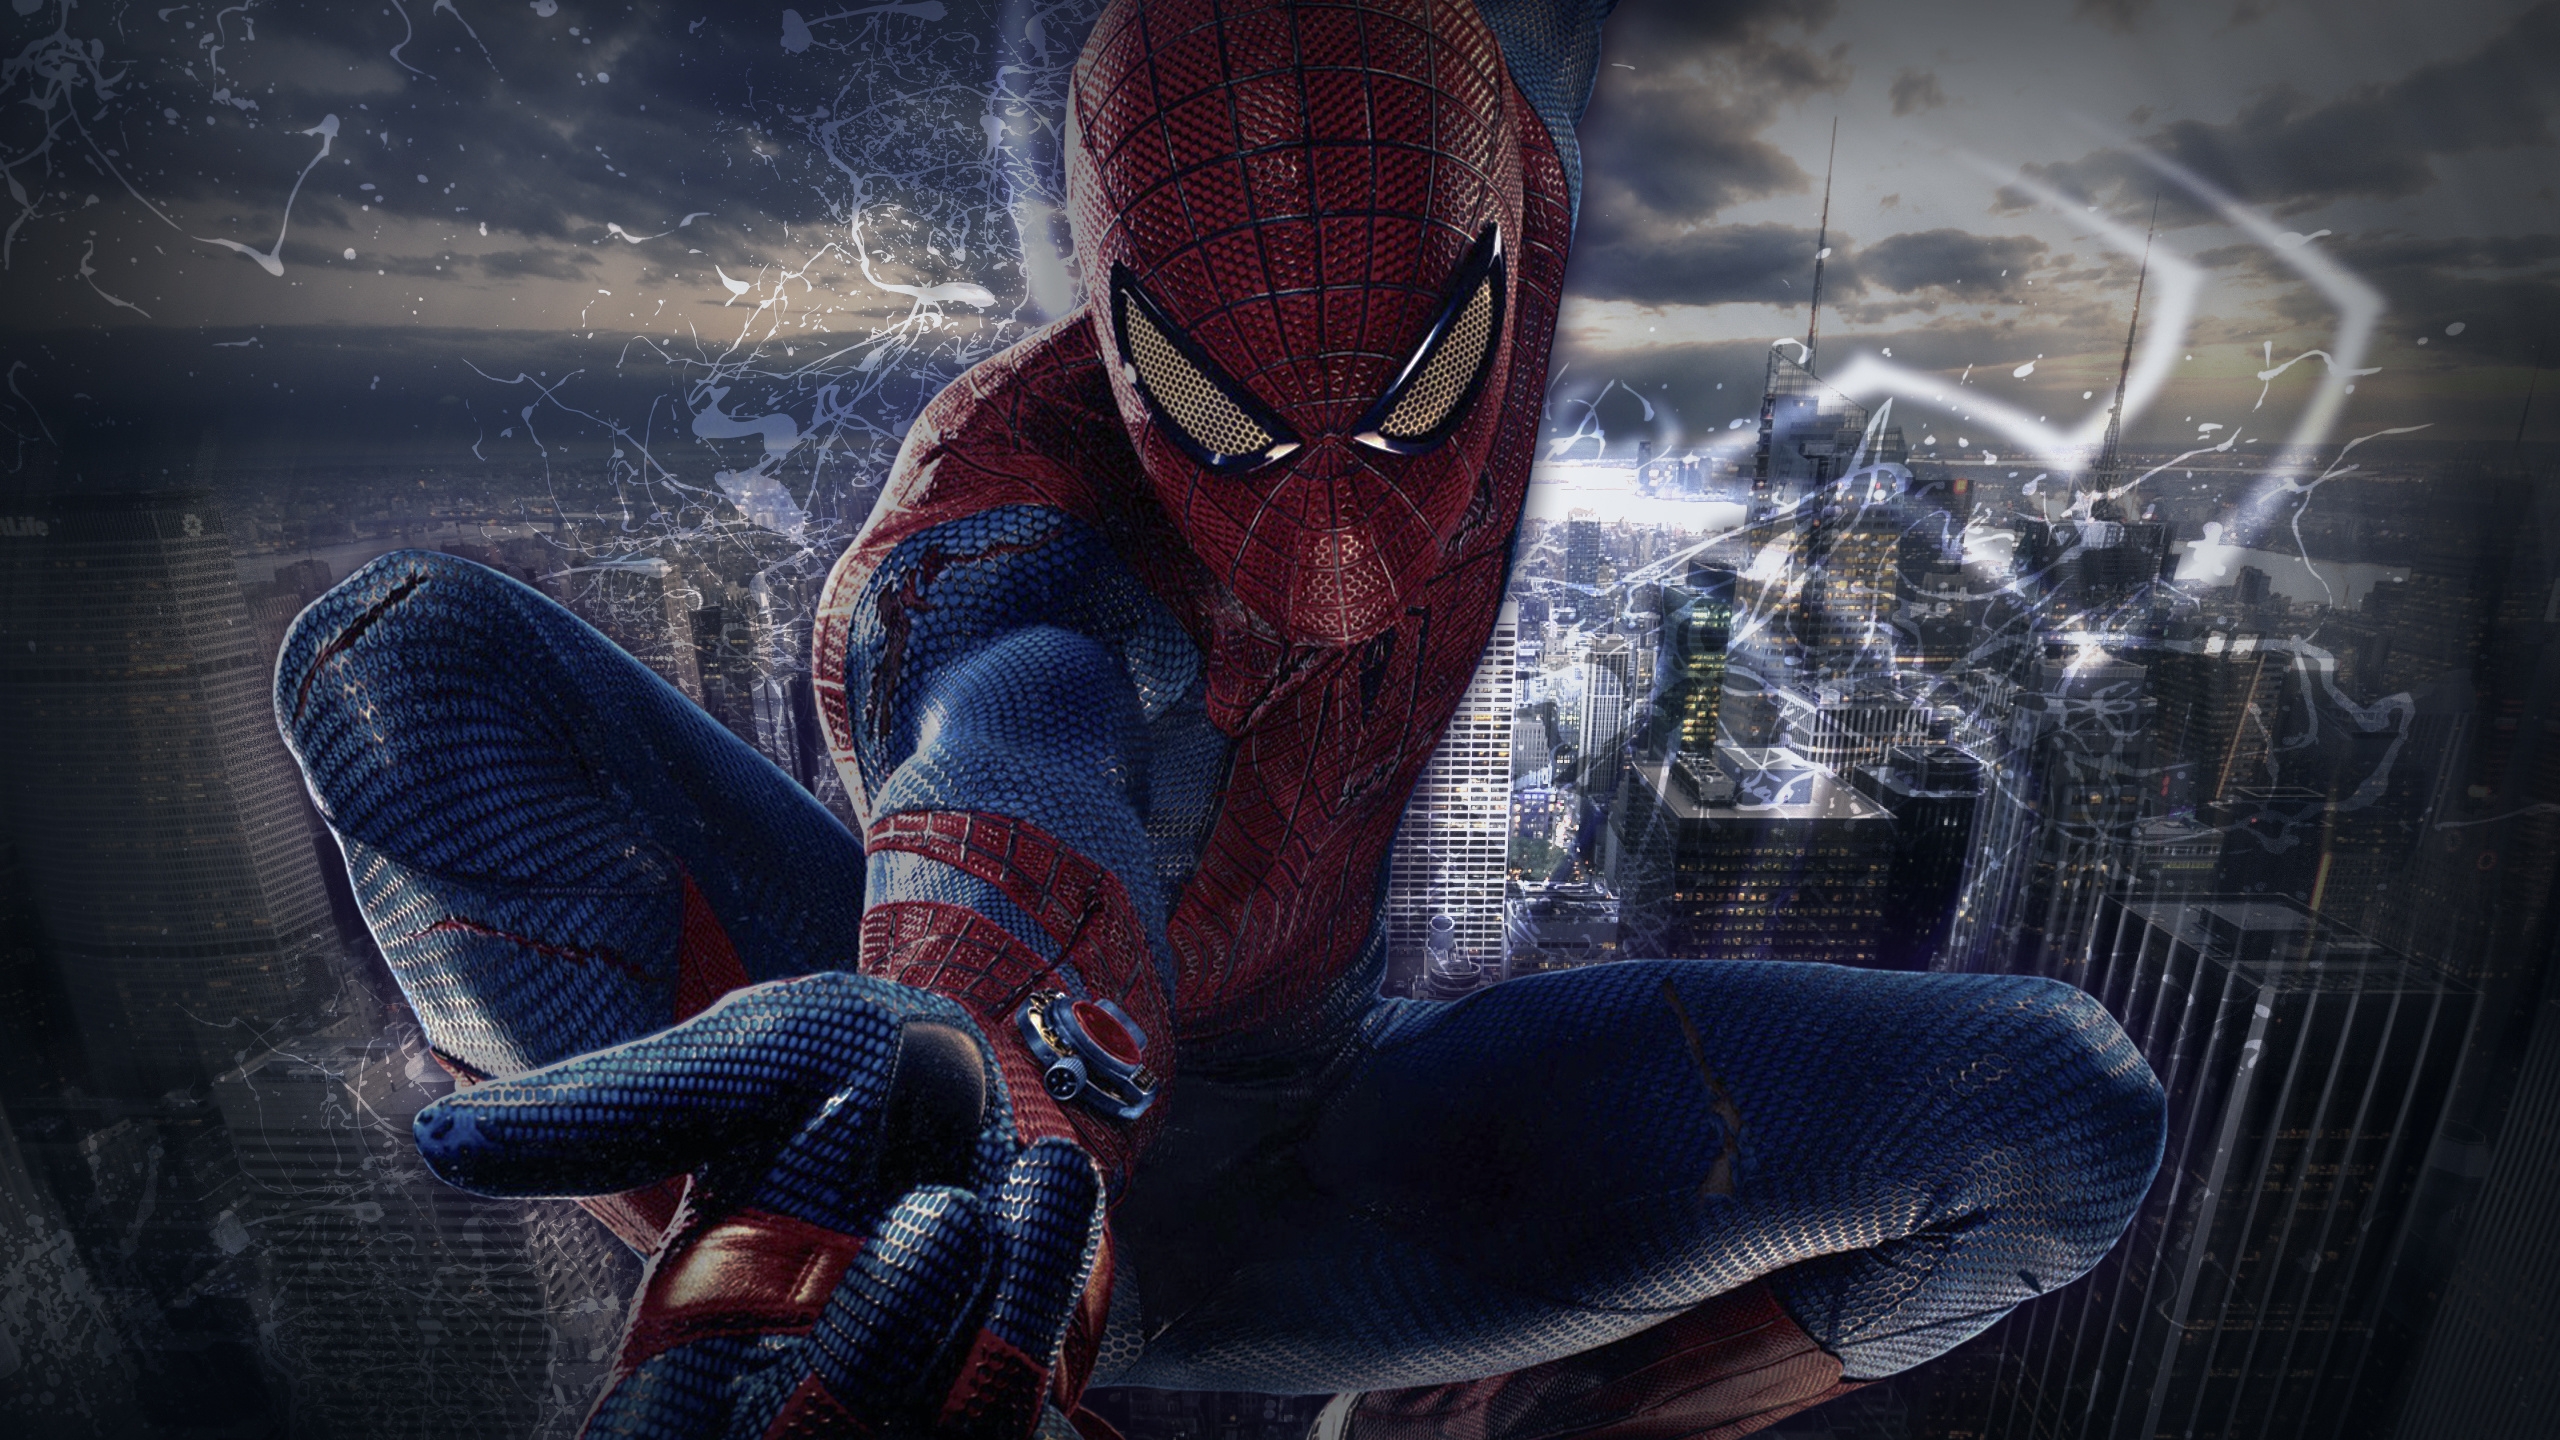 Spiderman Pose for 2560x1440 HDTV resolution